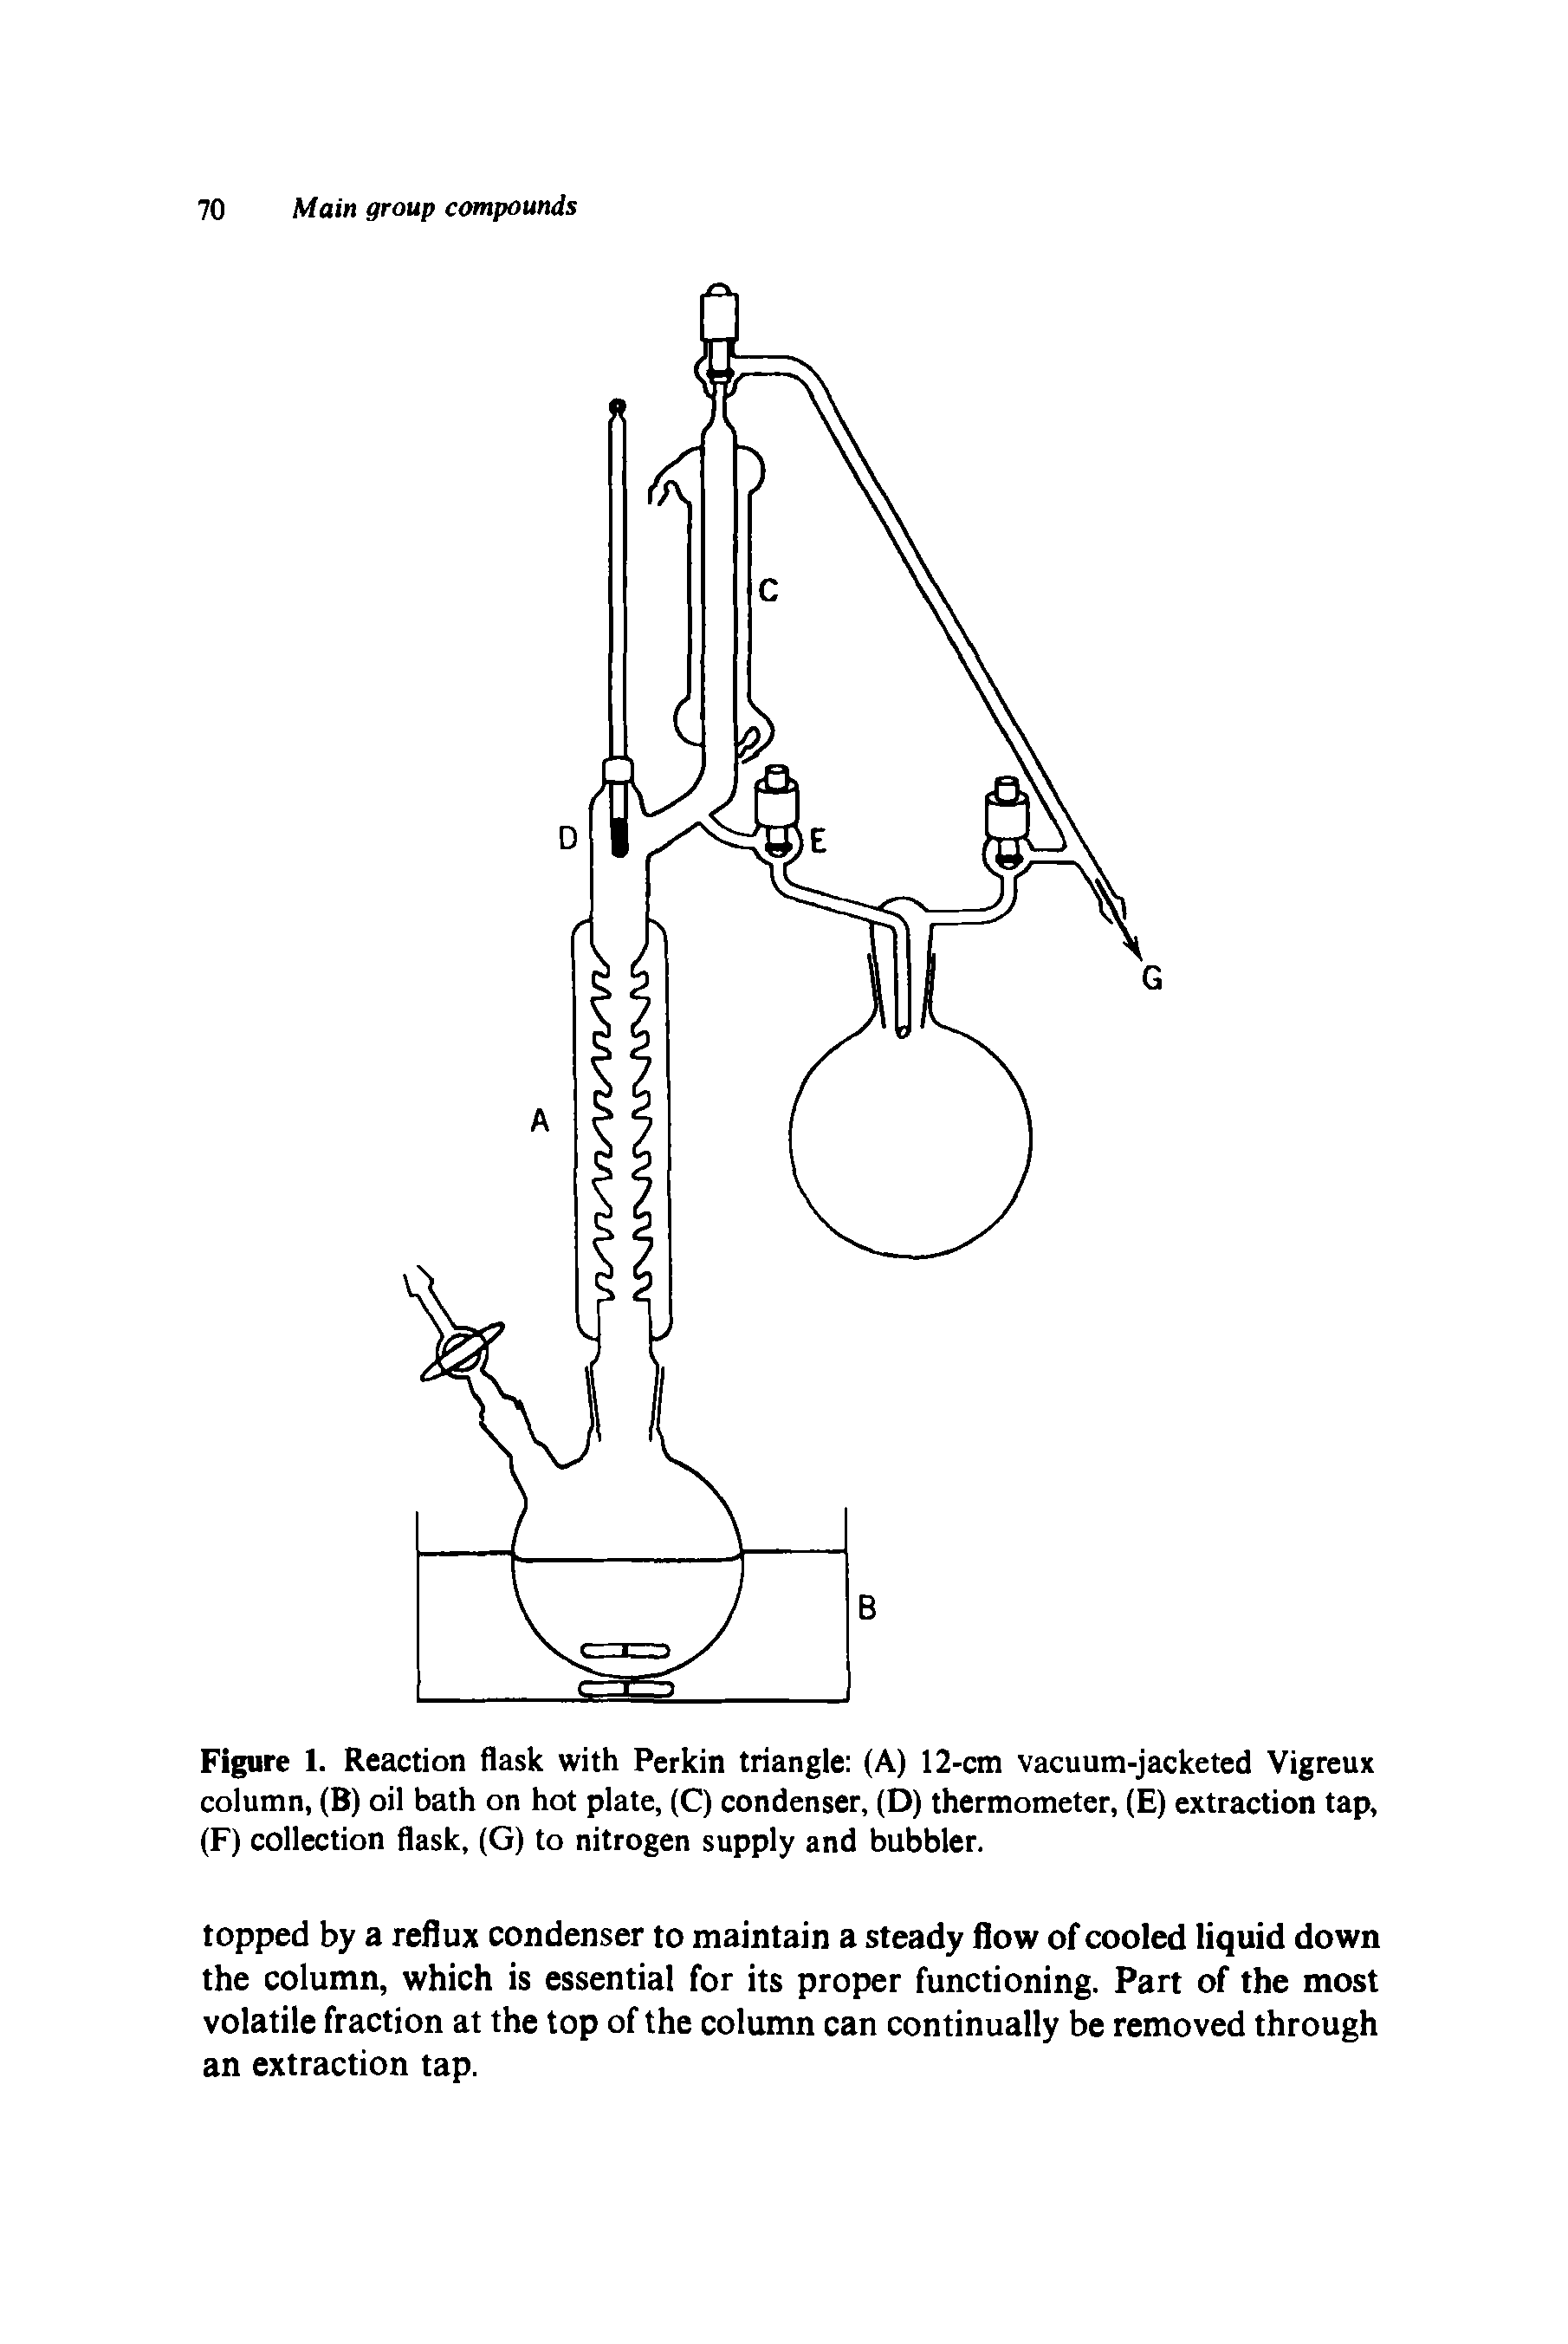 Figure 1. Reaction flask with Perkin triangle (A) 12-cm vacuum-jacketed Vigreux column, (B) oil bath on hot plate, (C) condenser, (D) thermometer, (E) extraction tap, (F) collection flask, (G) to nitrogen supply and bubbler.